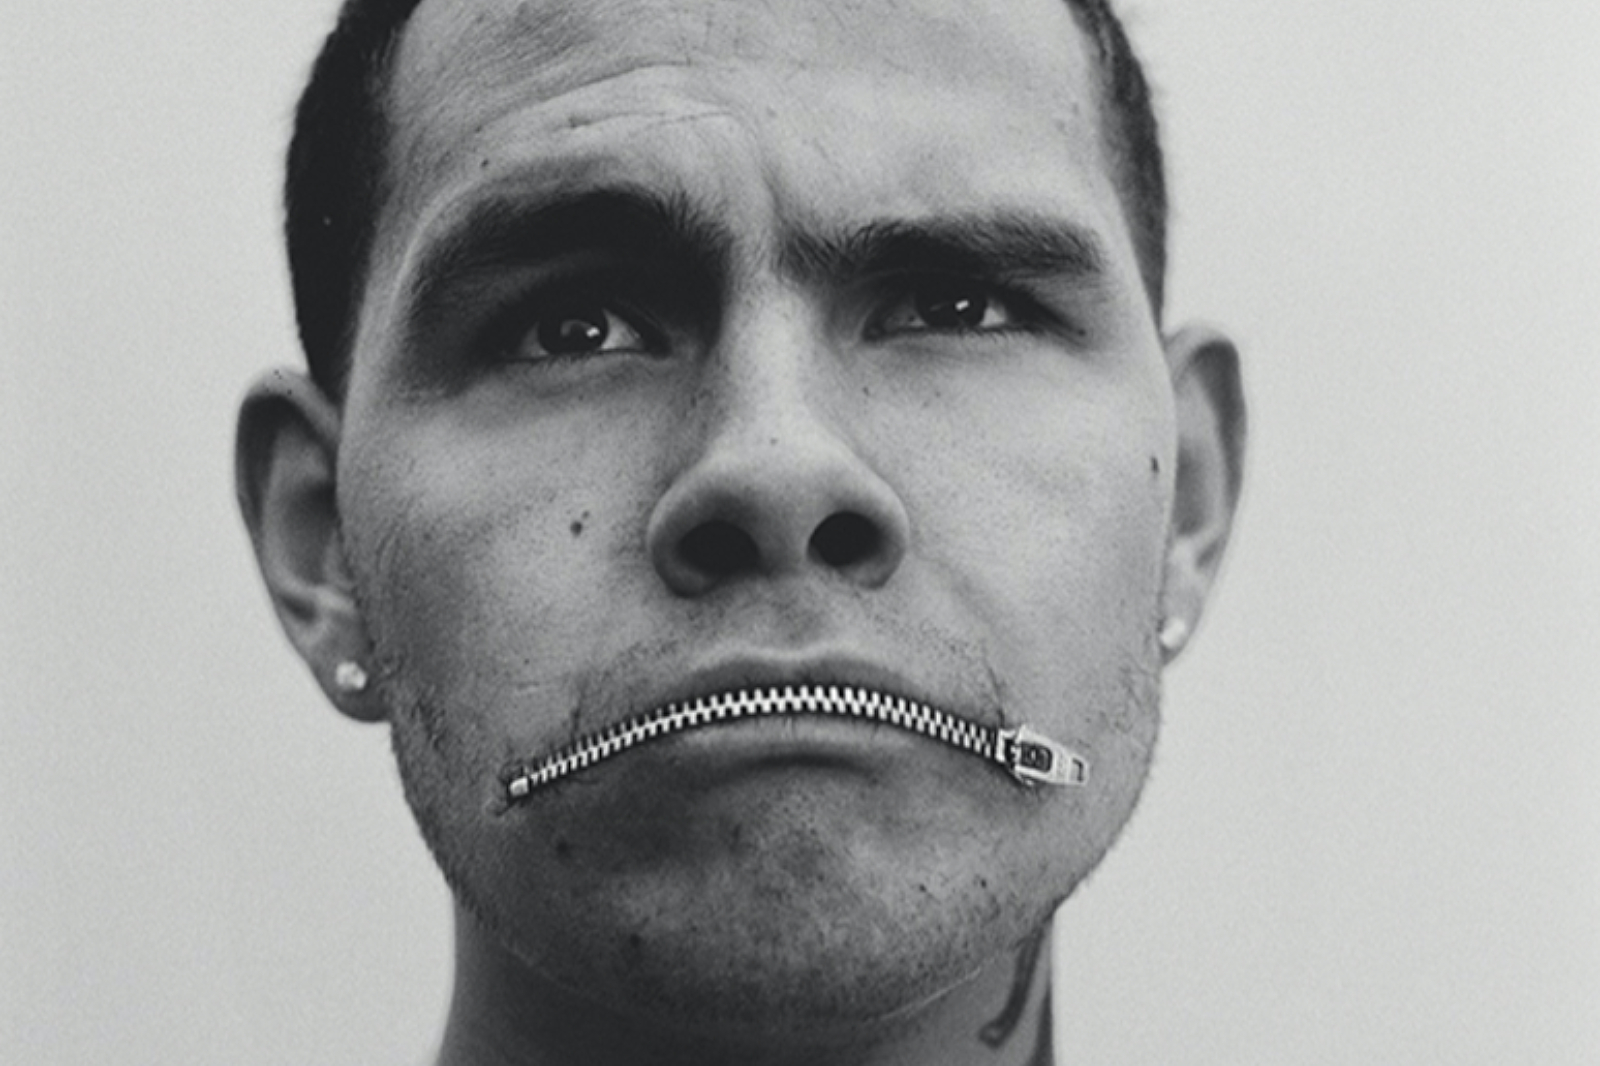 slowthai teams up with A$AP Rocky for new track 'MAZZA'